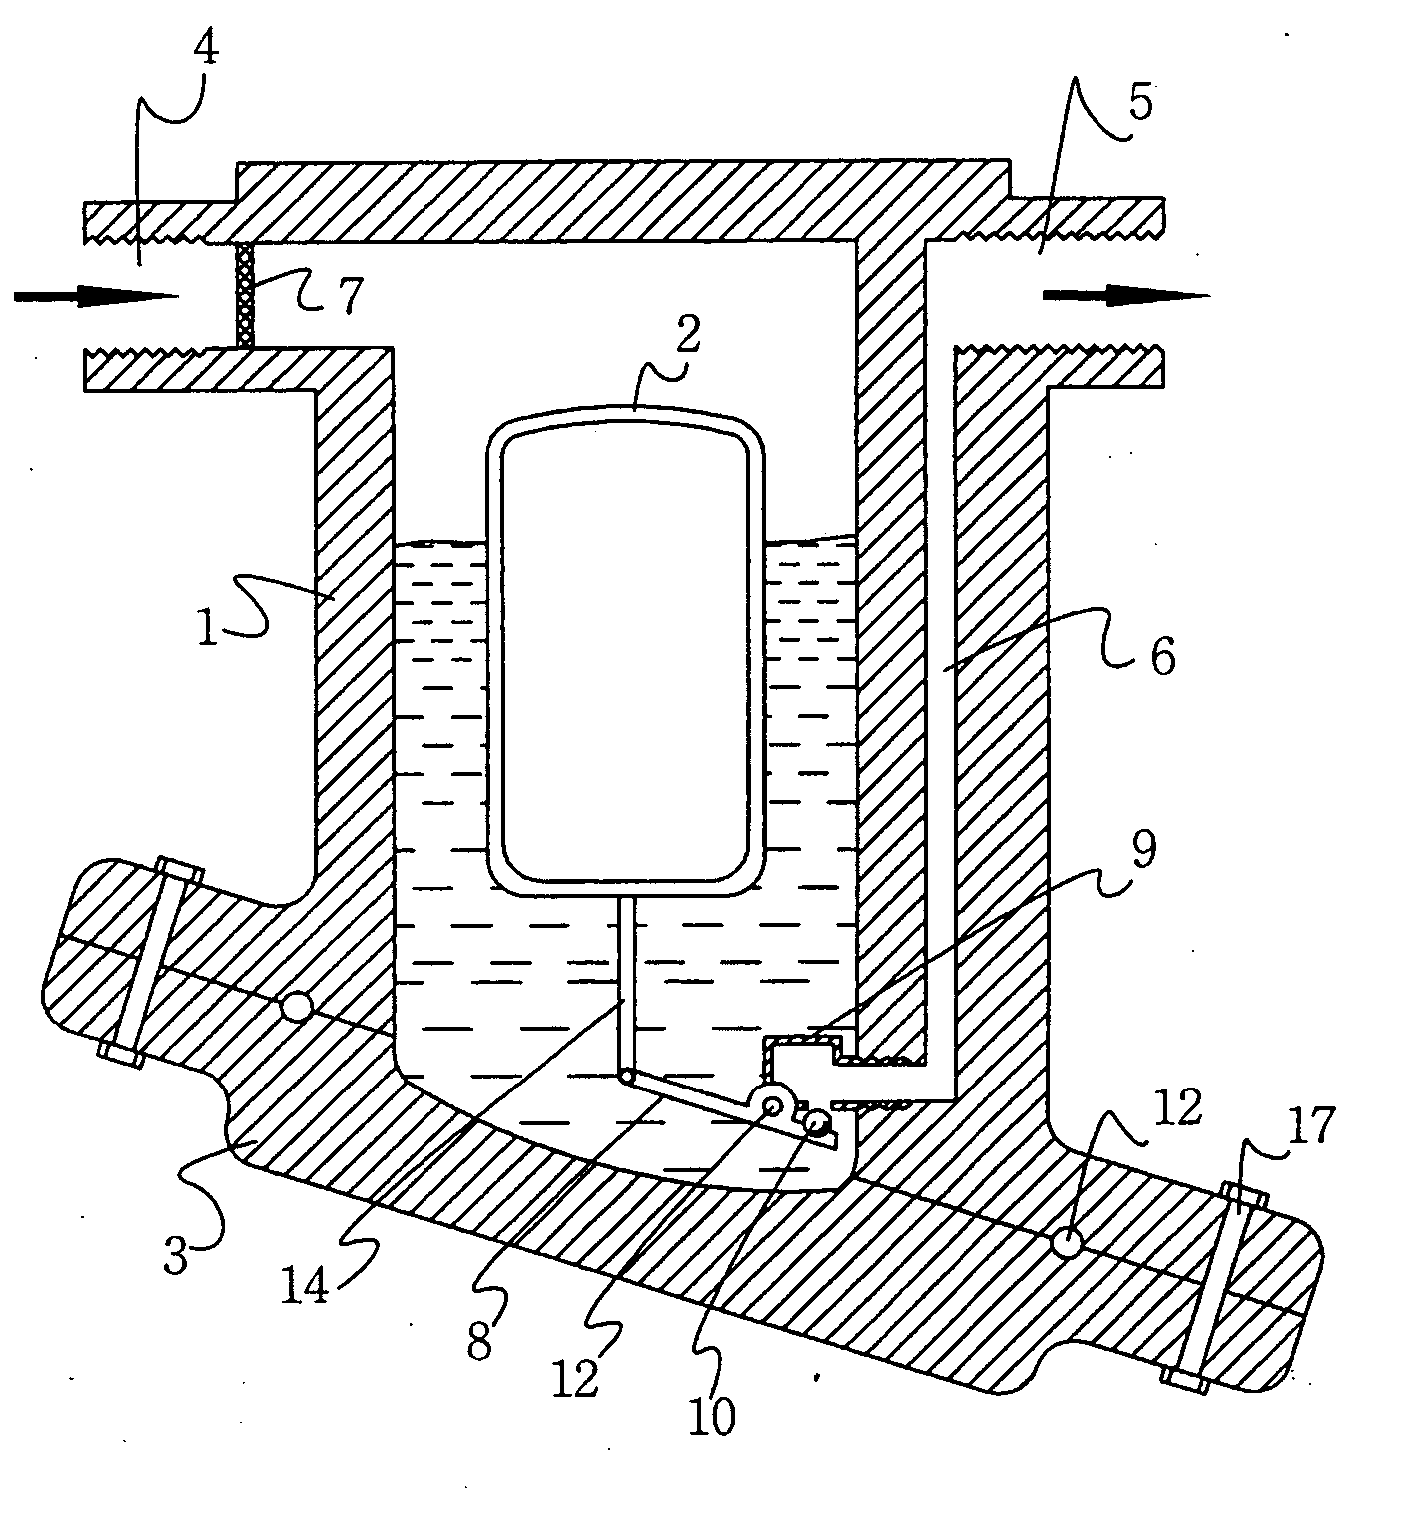 Steam trap with float